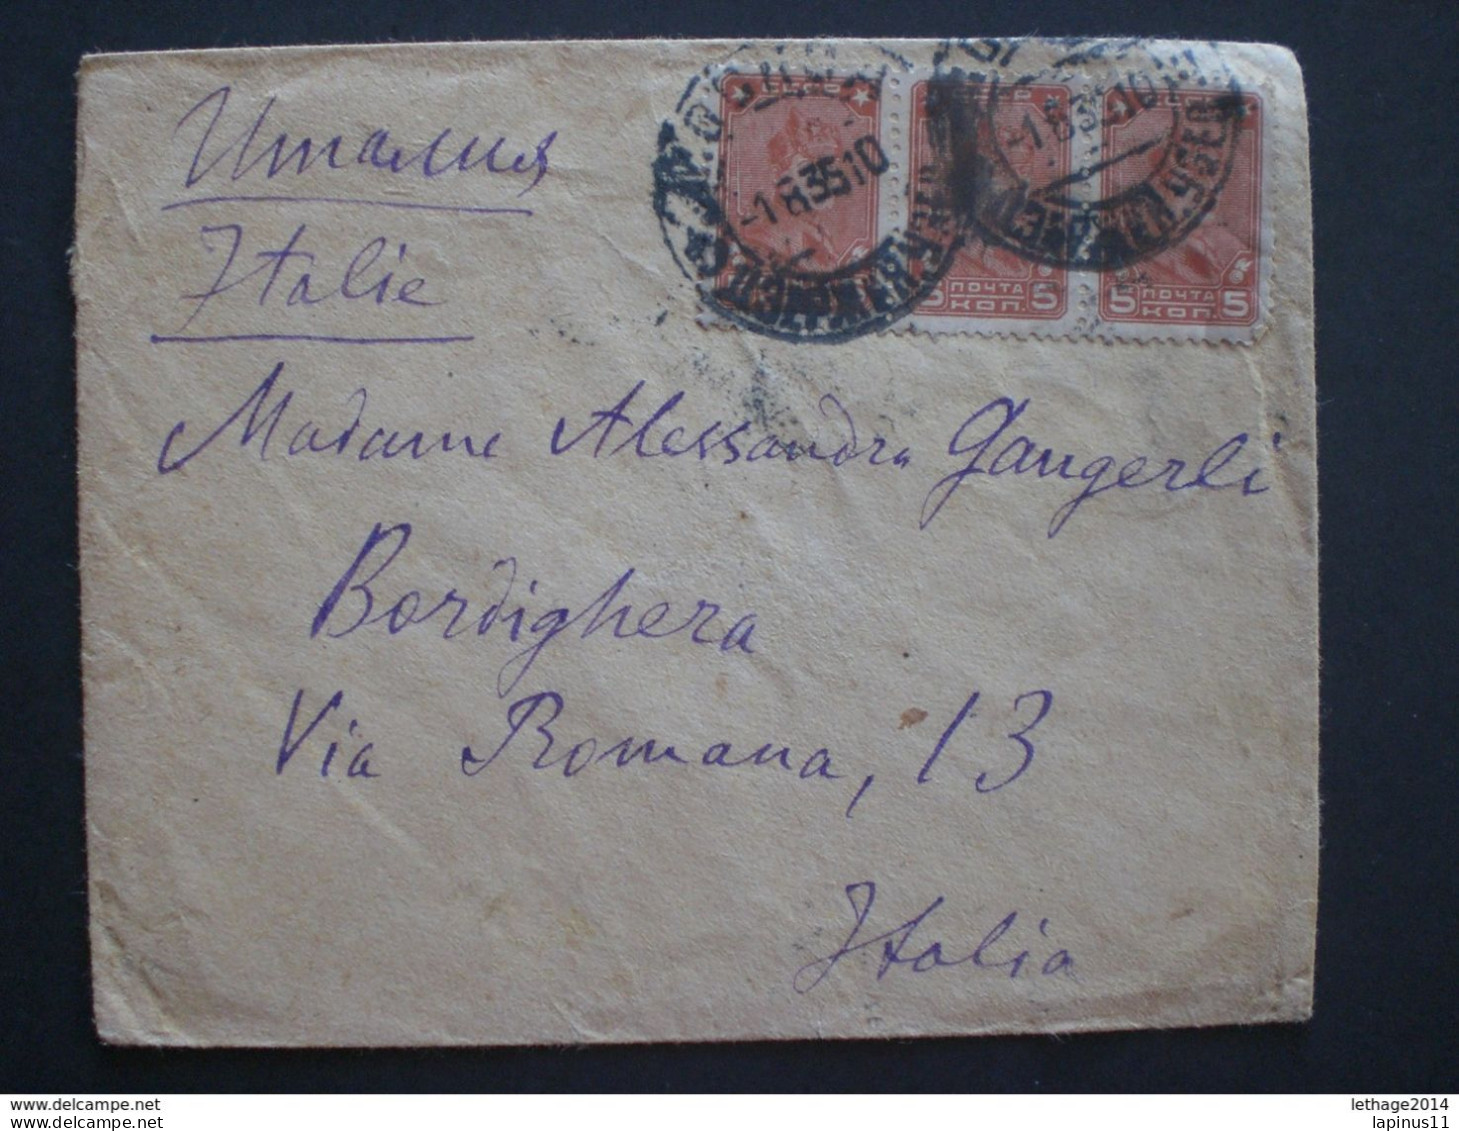 RUSSIA RUSSIE РОССИЯ STAMPS COVER 1935 Registered Mail RUSSIE TO ITALY RRR RIF.TAGG. (11) - Cartas & Documentos